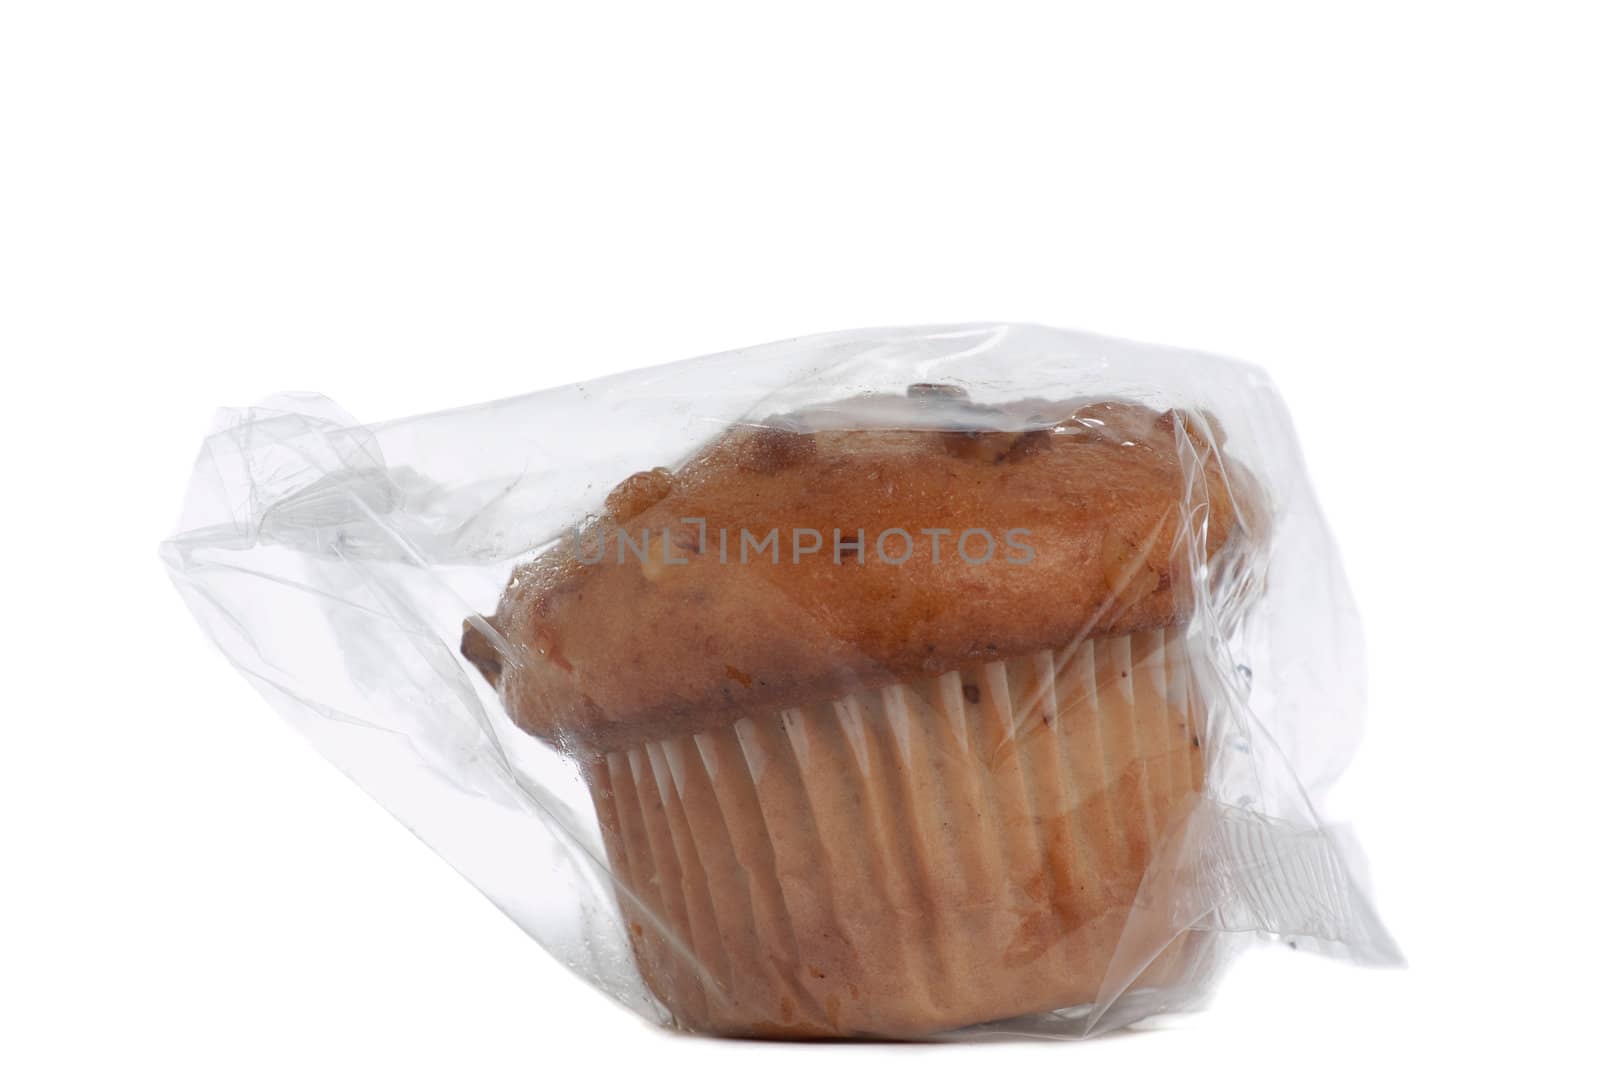 wrapped muffin isolated on white background